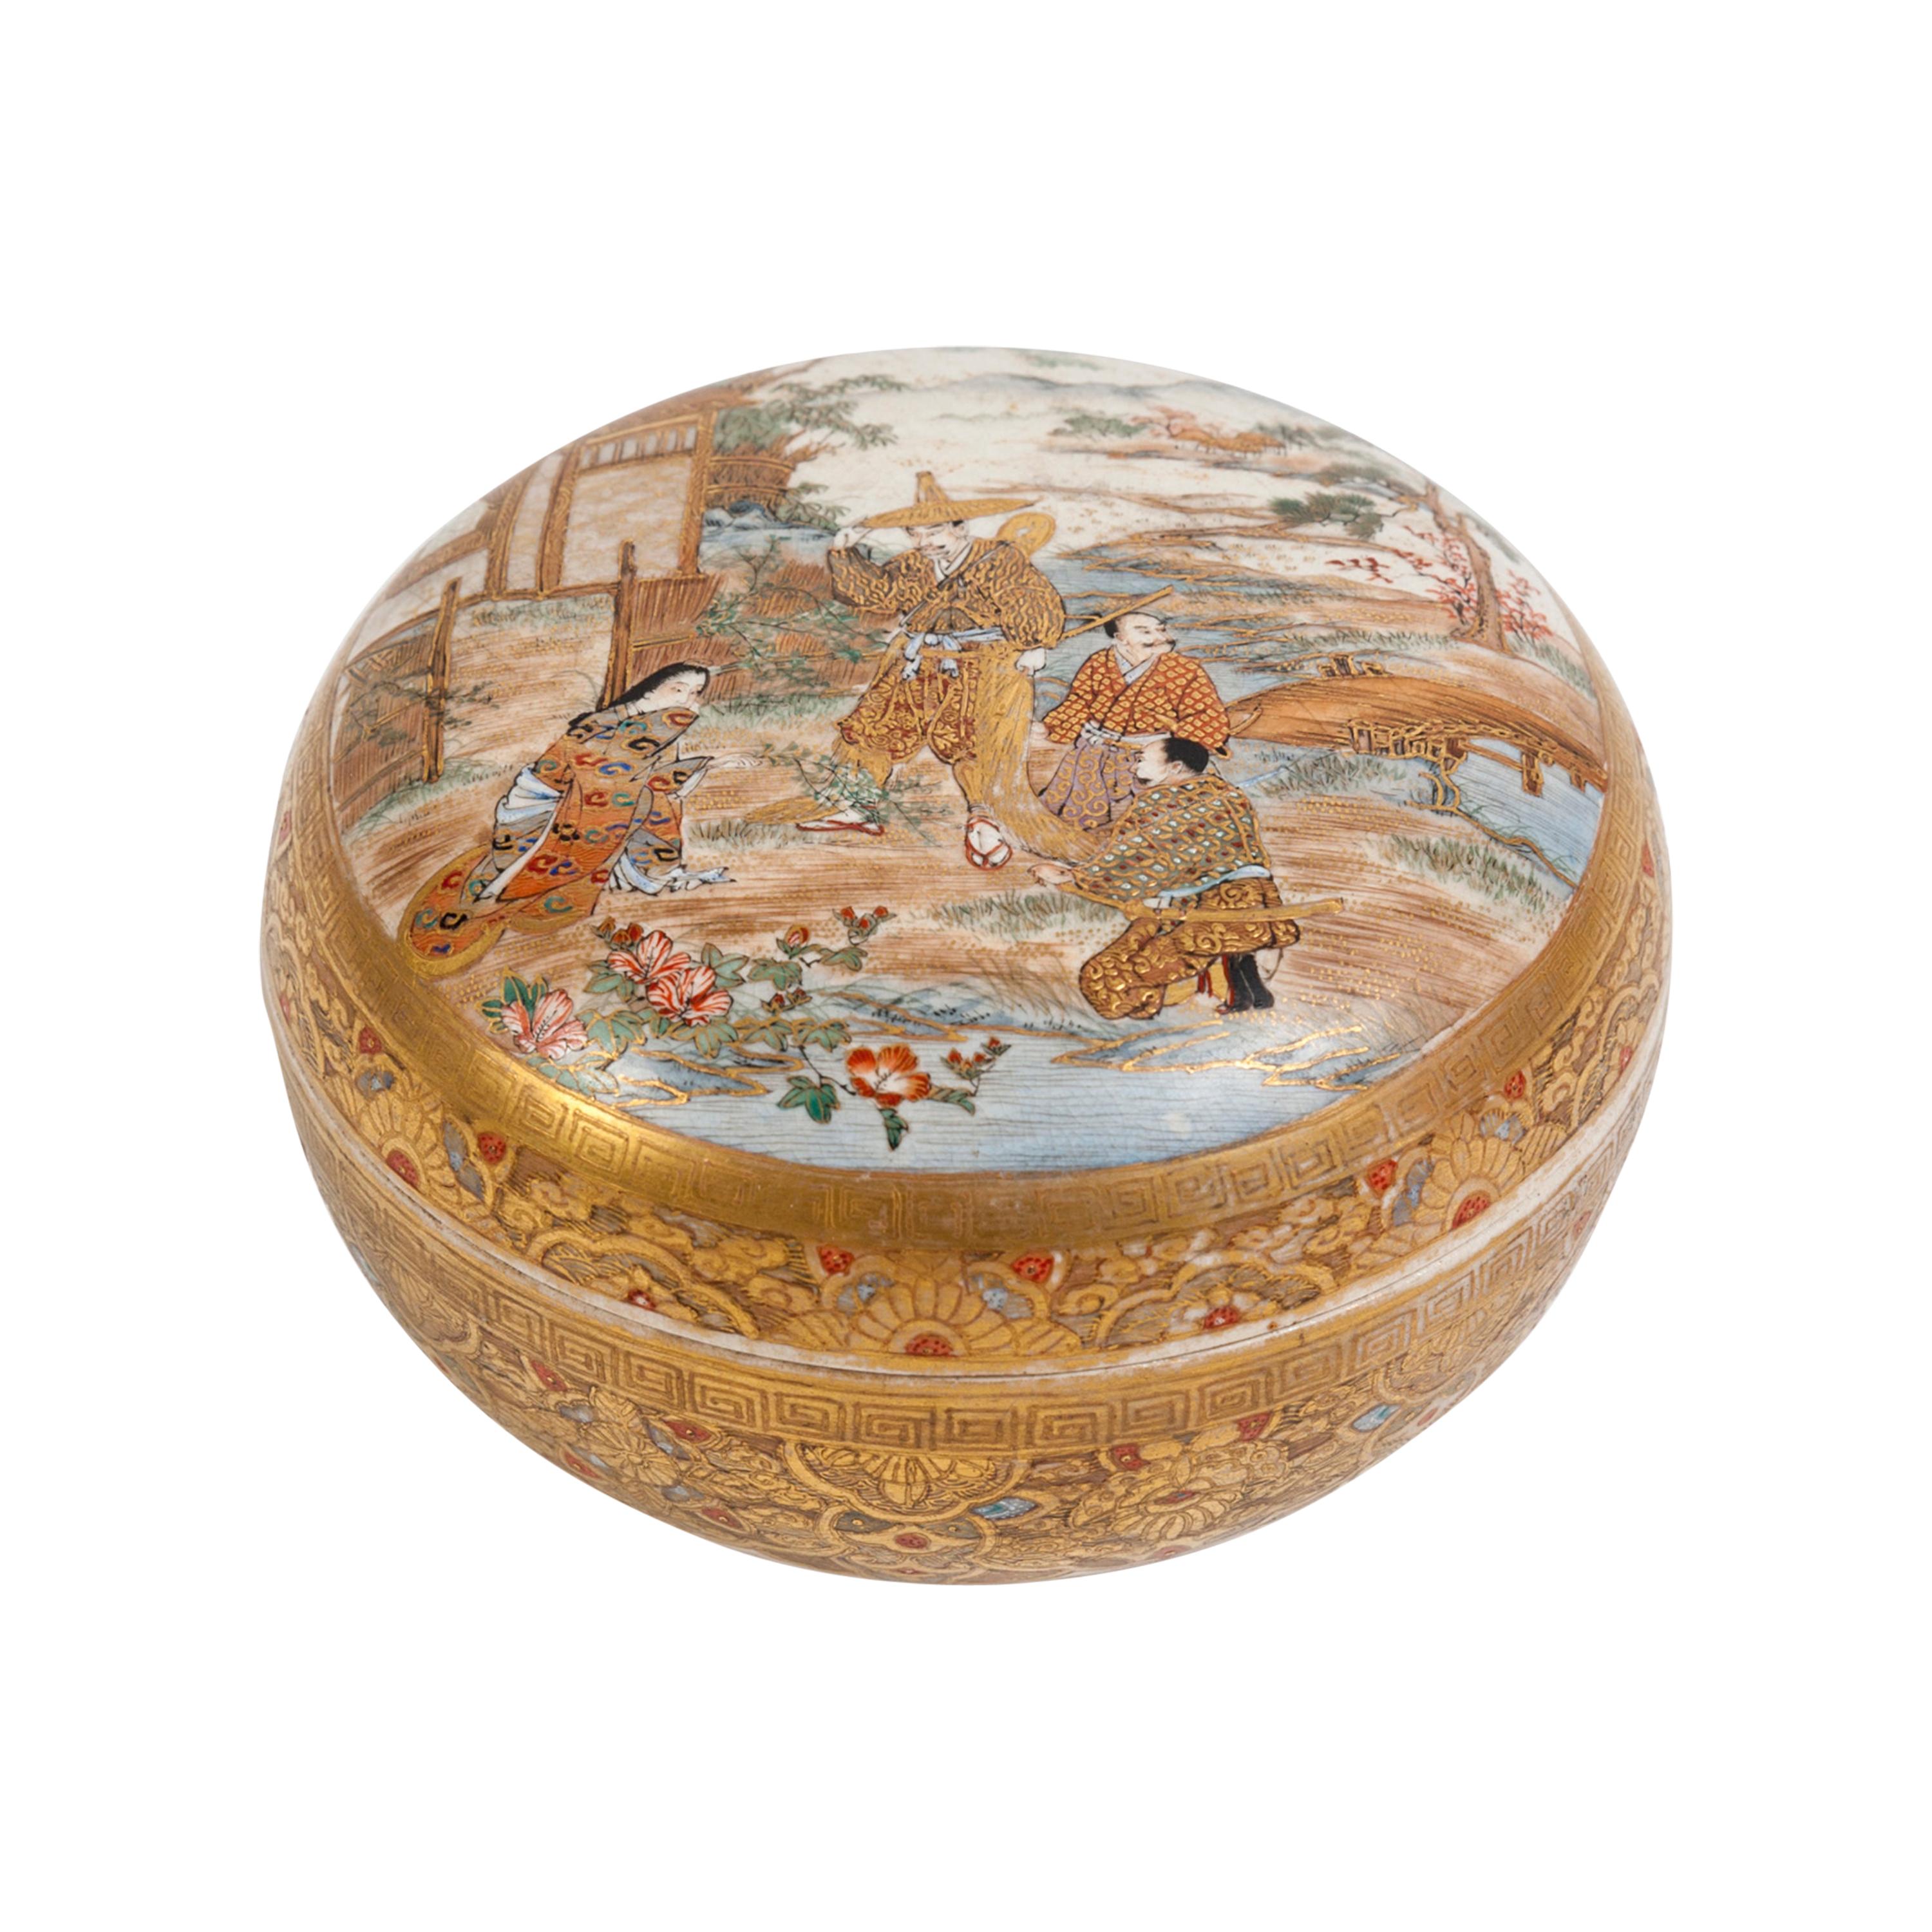 Satsuma Covered Box with Figures, Porcelain, Japan, Late 19th Century For Sale